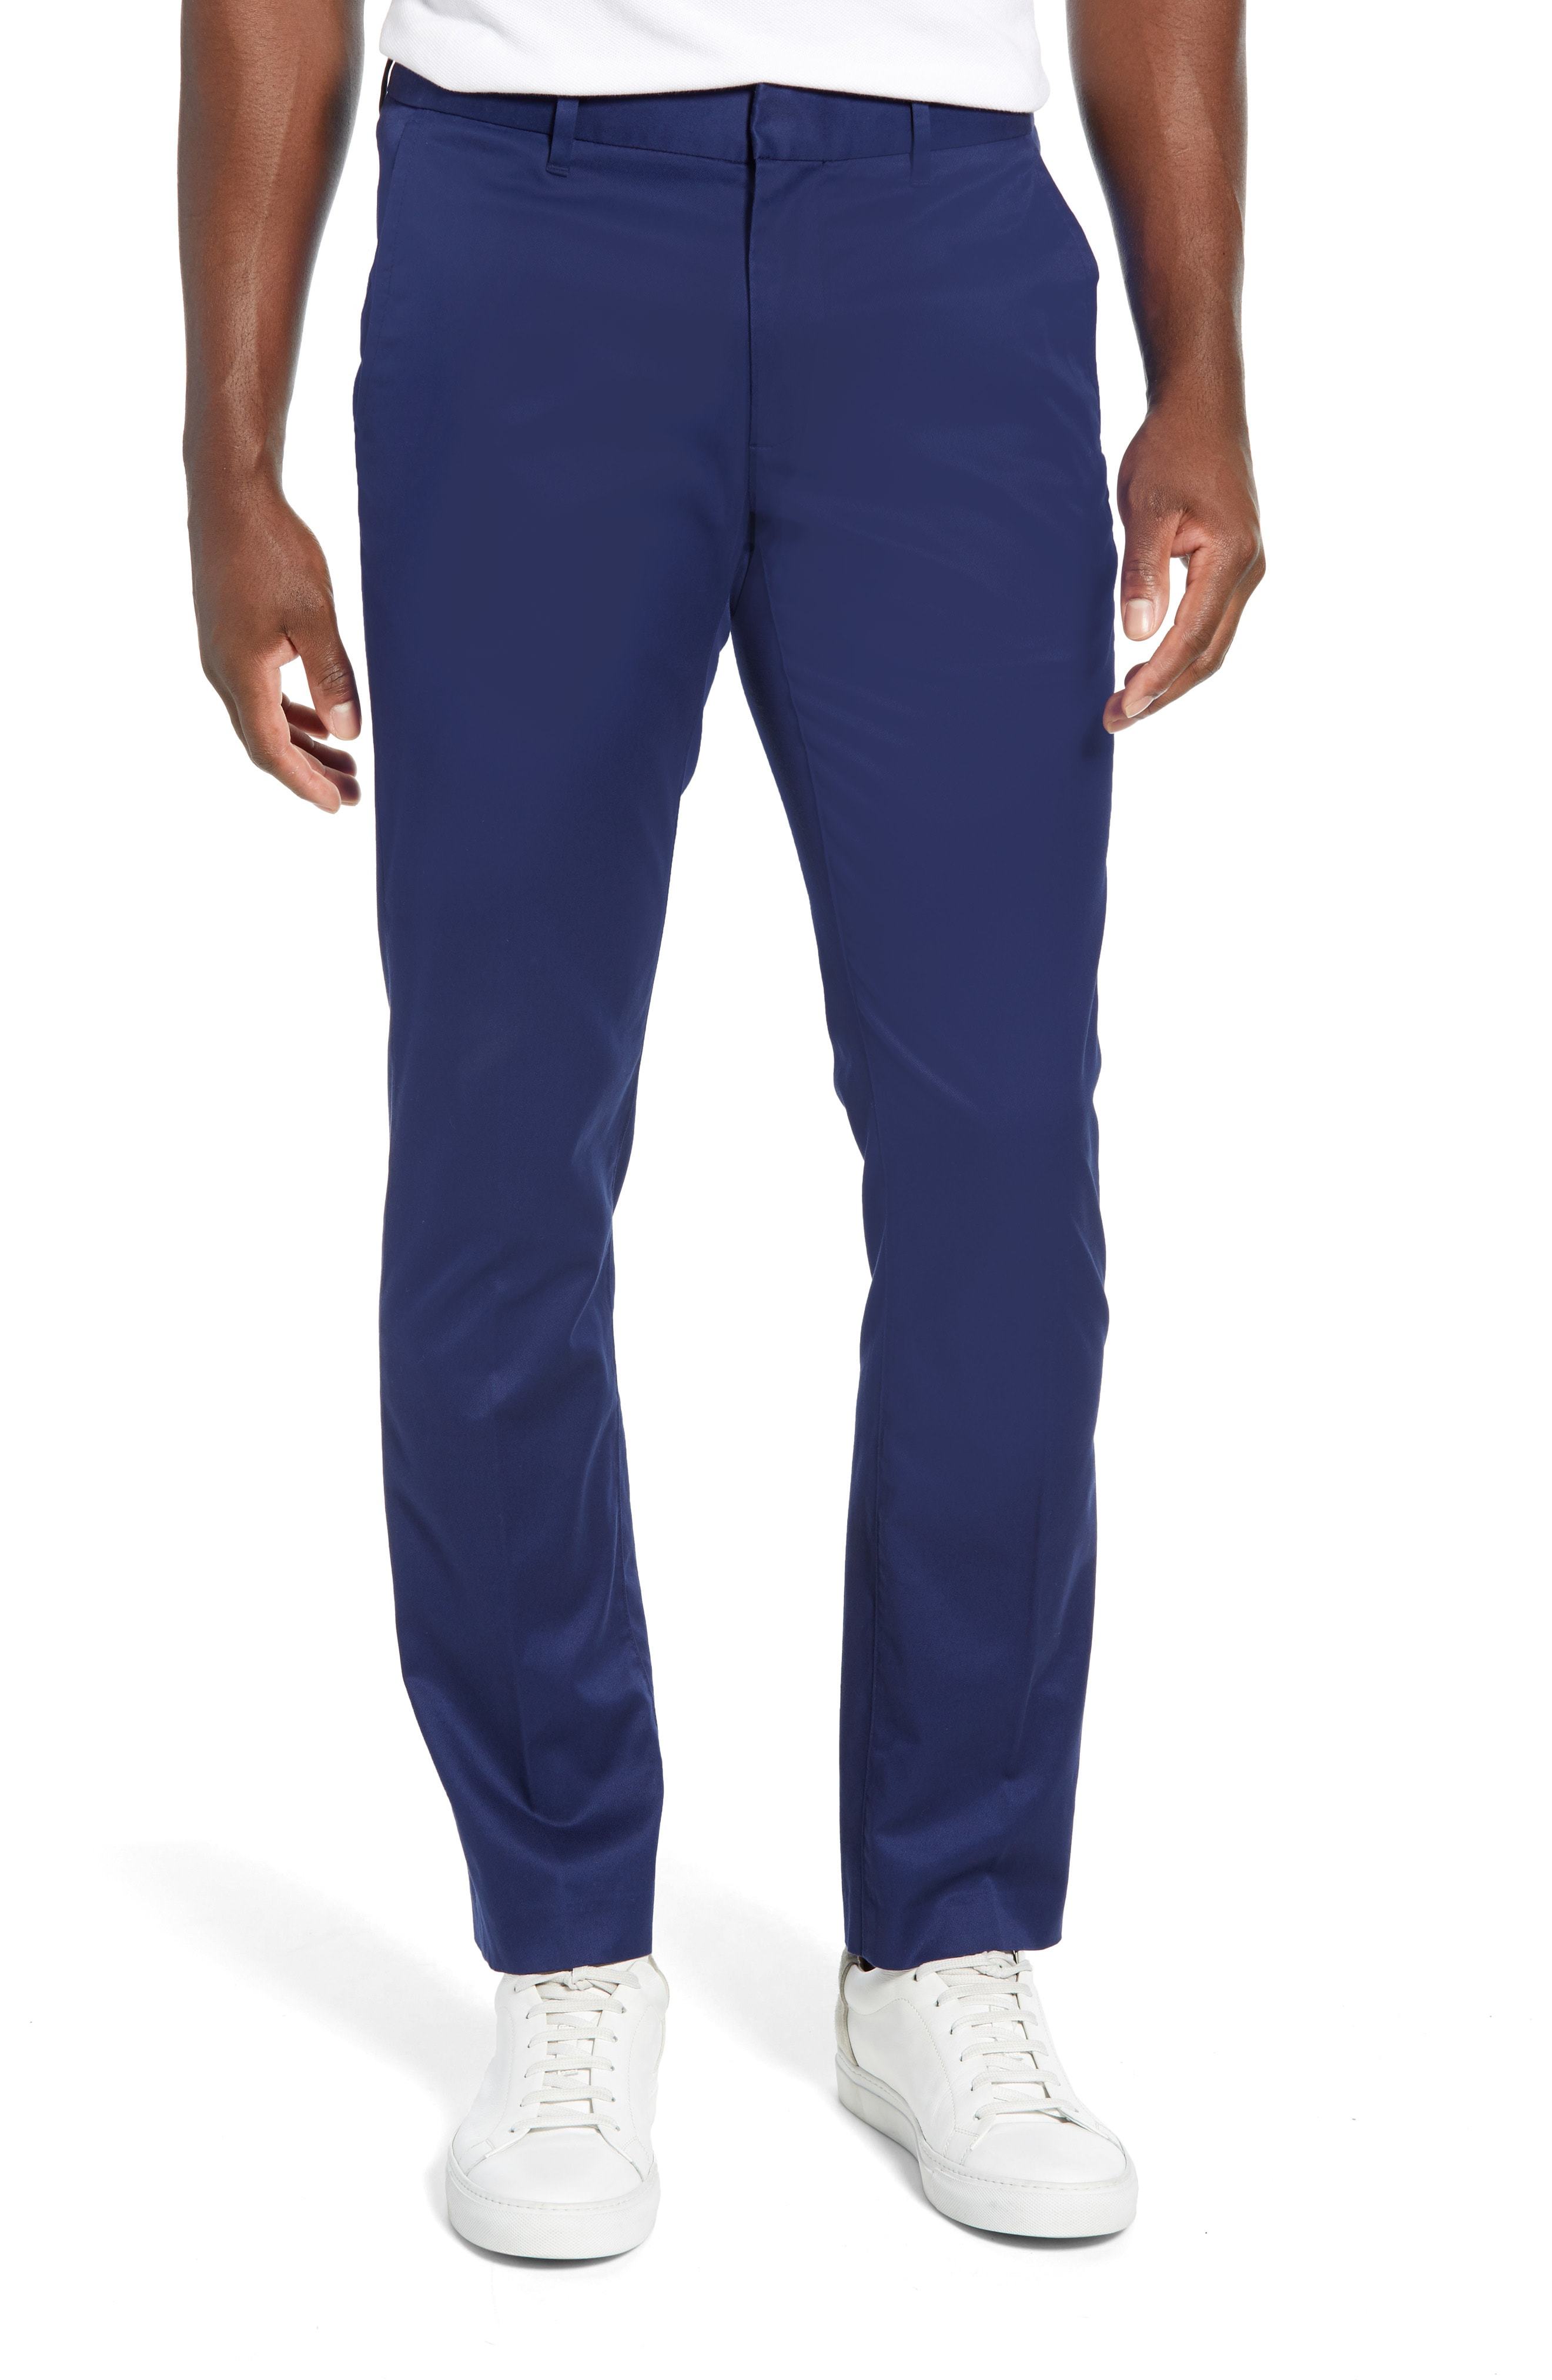 Bonobos Weekday Warrior Tailored Fit Stretch Dress Pants, $98 ...